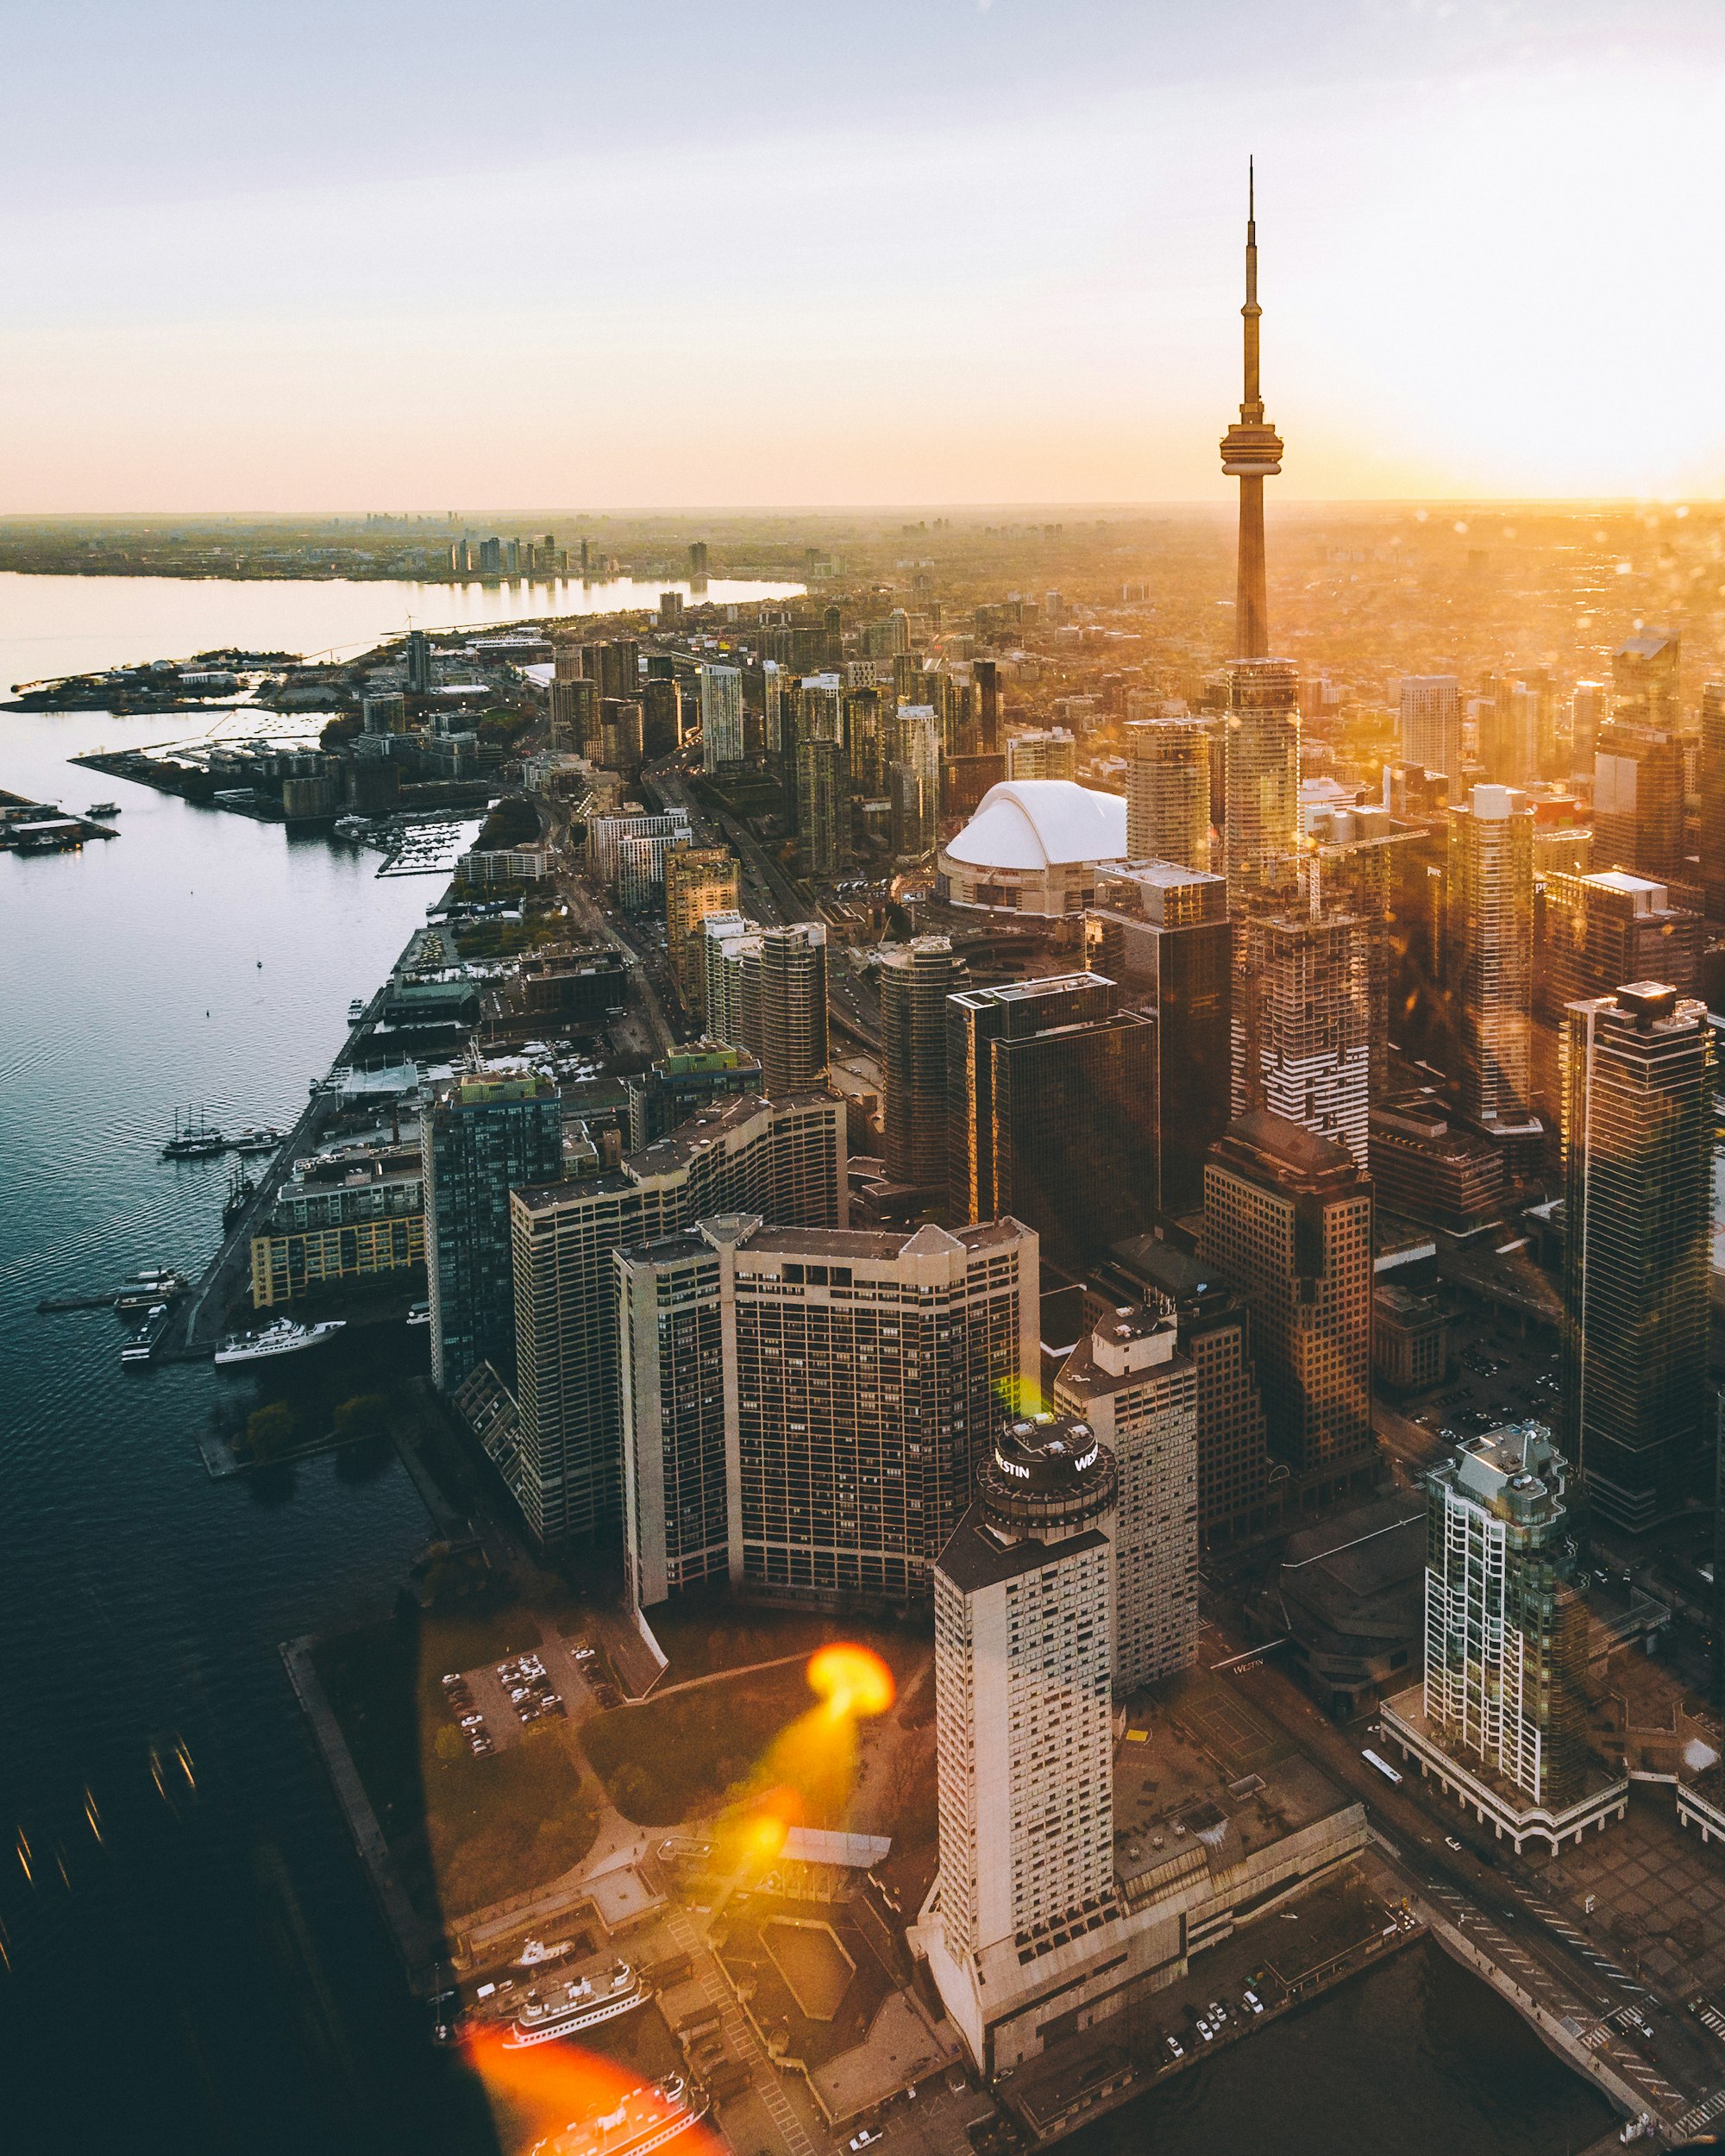 Sunset helicopter tour over downtown Toronto. Another beautiful day in a beautiful city. If you ever get a chance to  see a city by air go for it, you wont regret it!